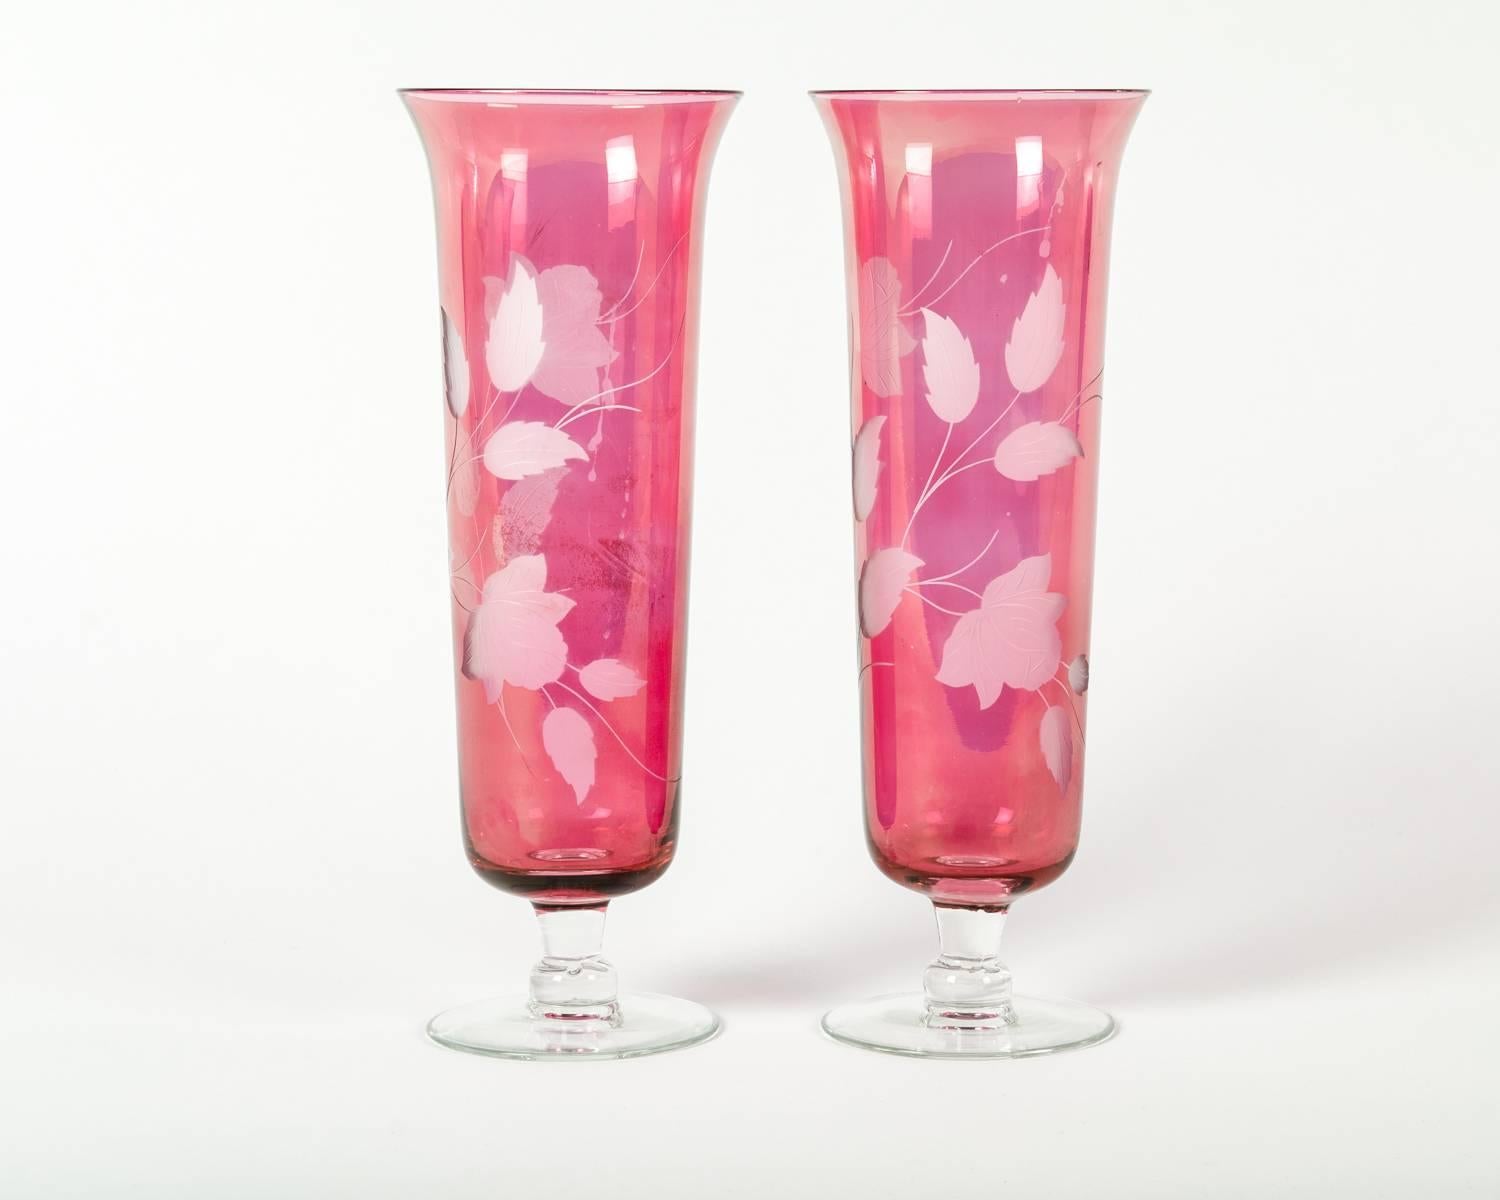 Vintage etched crystal cranberry pair of decorative vases with clear stem. Each one measure 14 inches high x 5 inches diameter. Excellent condition.